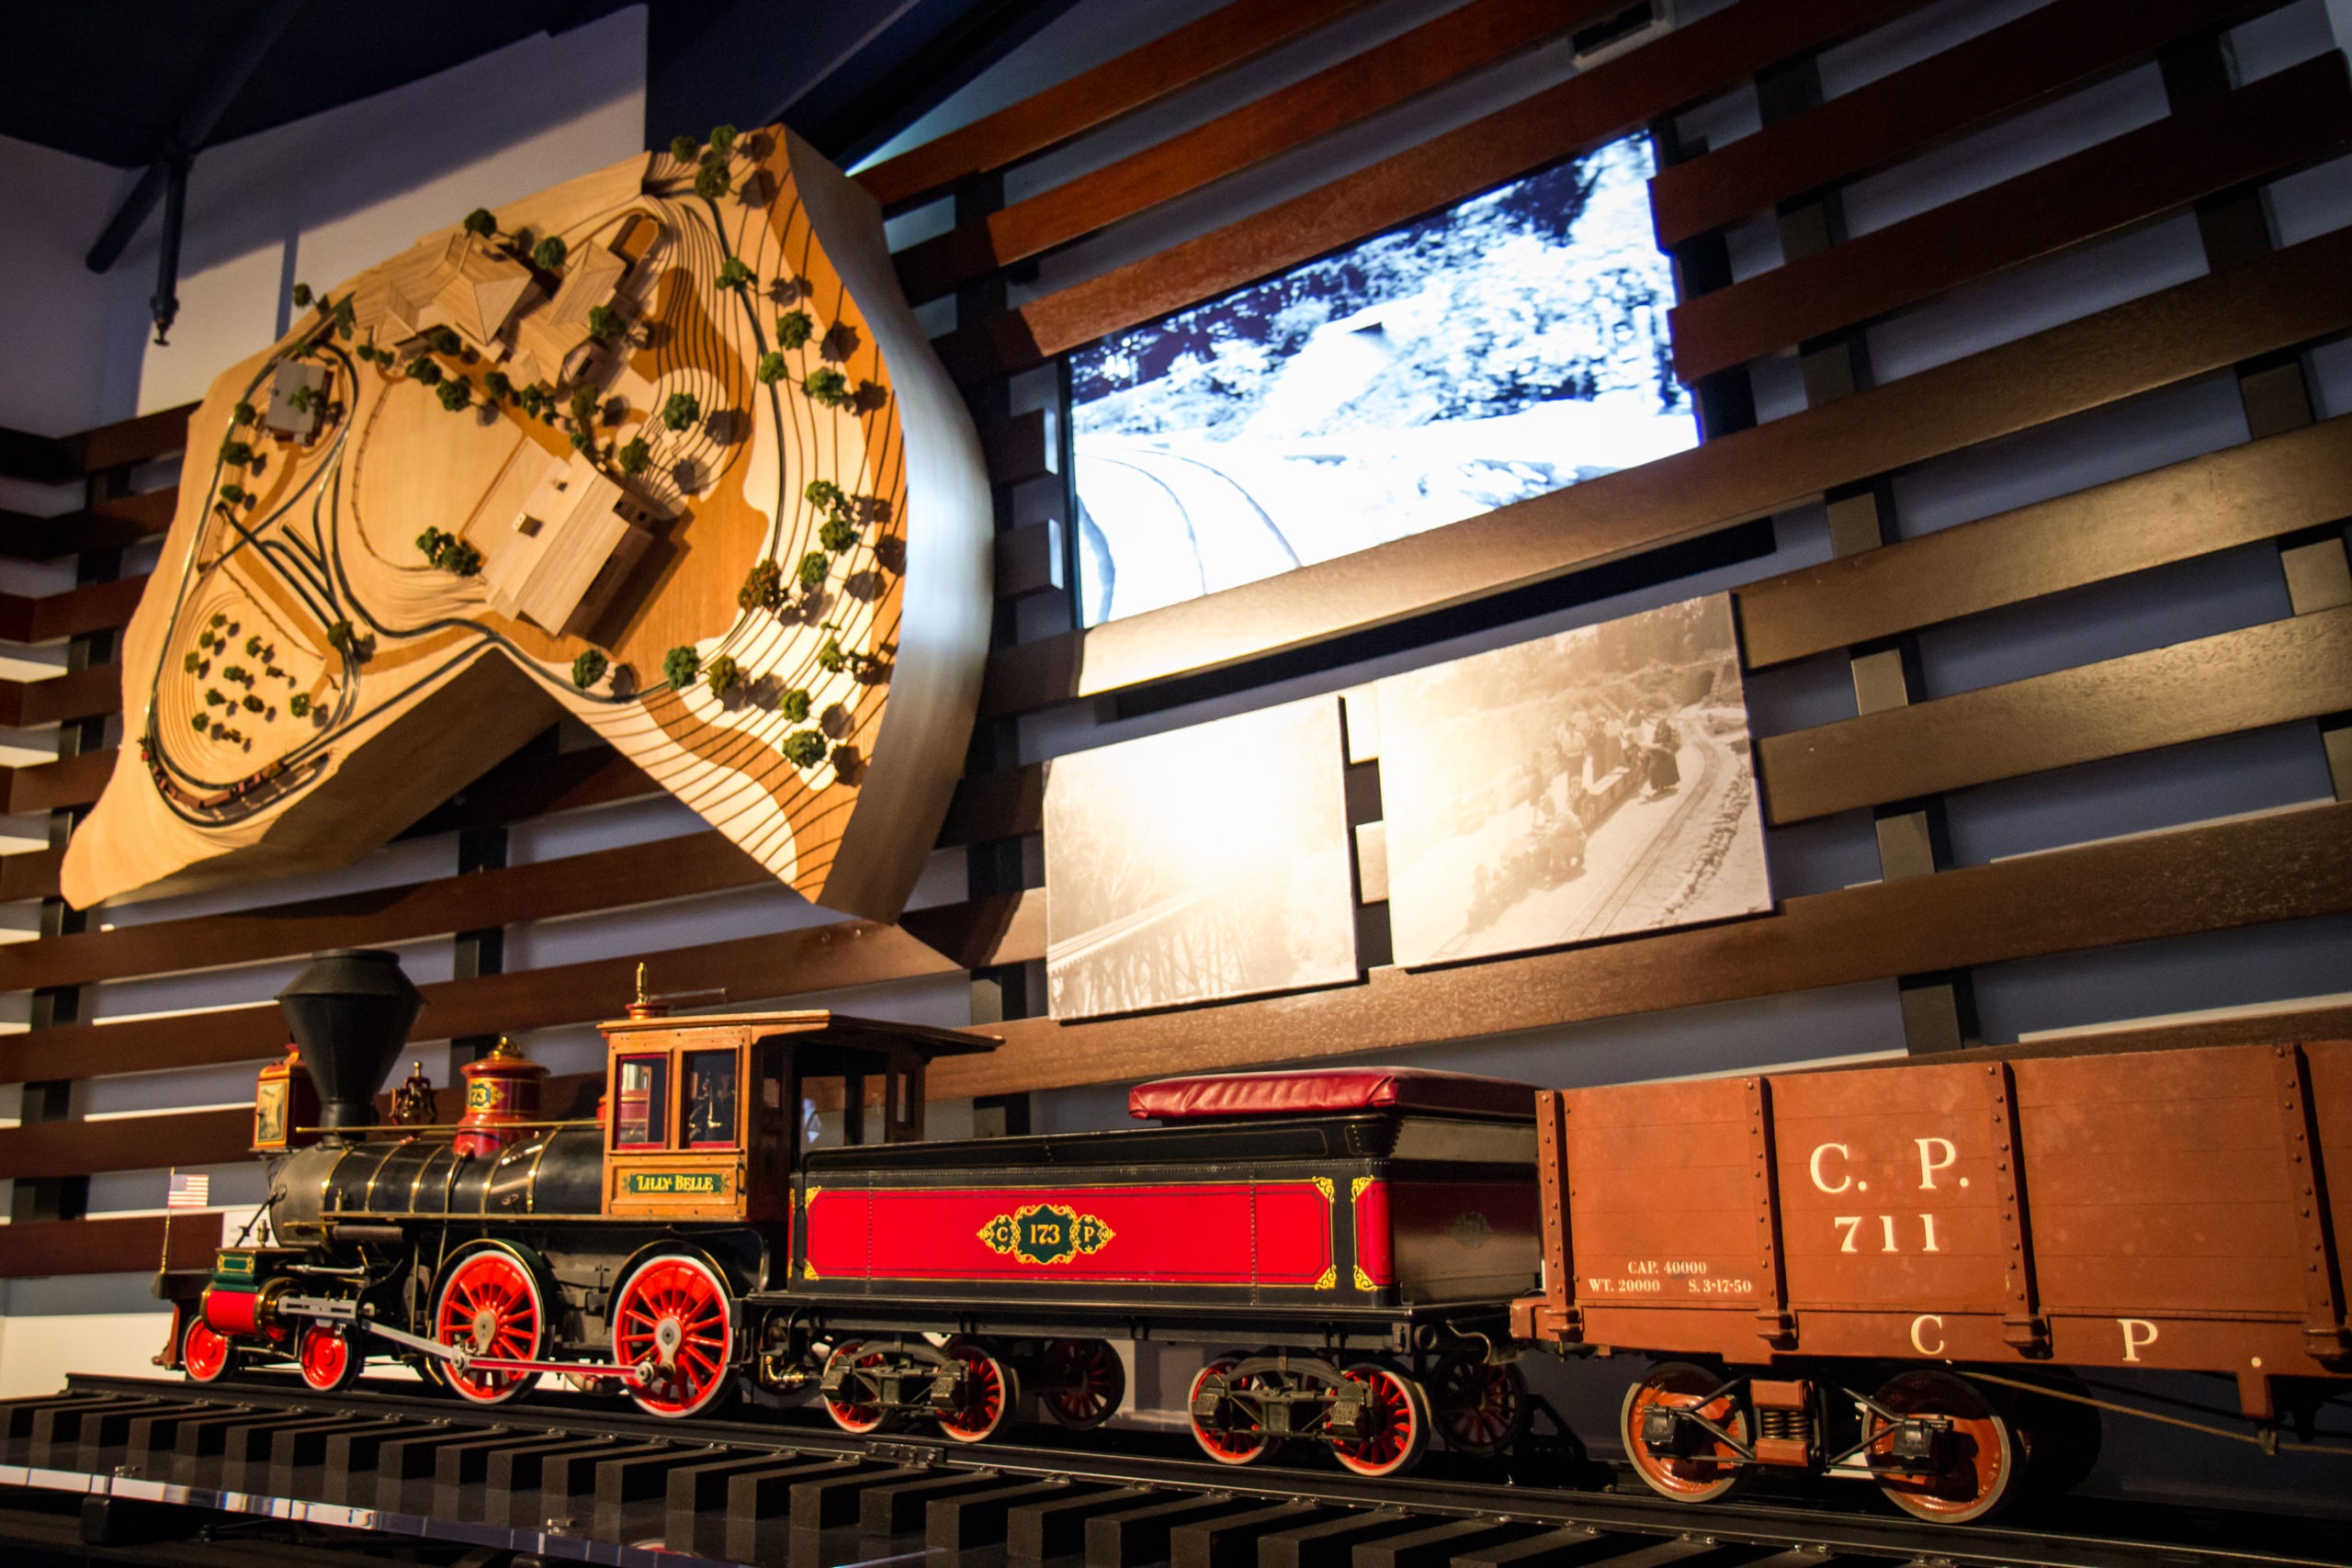 Lilly Belle locomotive from the Carolwood Pacific Railroad at the Walt Disney Family Museum.